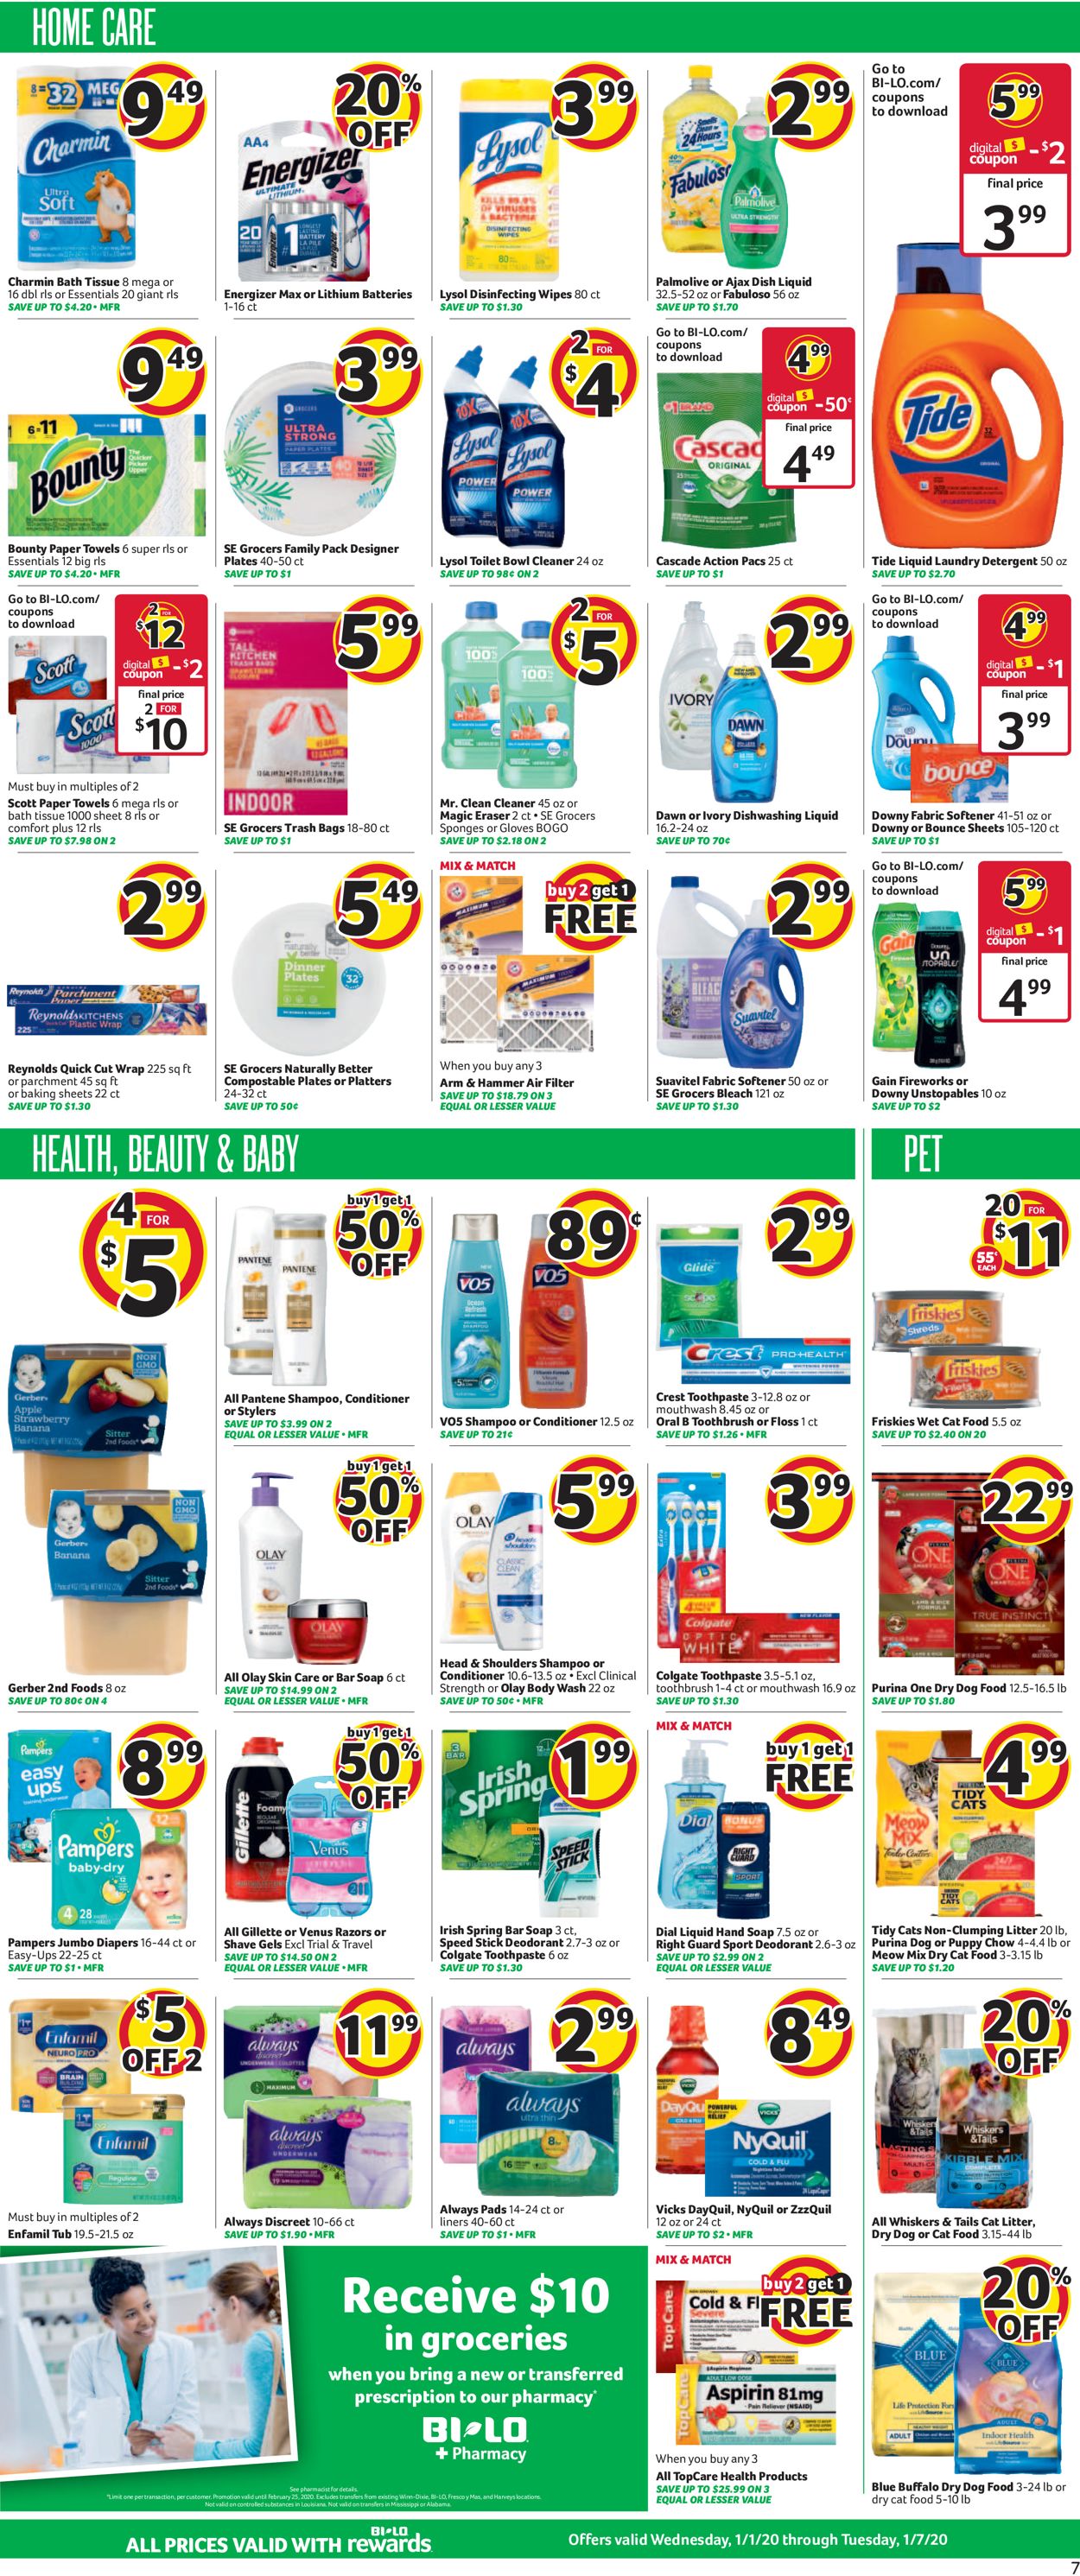 BI-LO Current weekly ad 01/01 - 01/07/2020 7 - frequent ...